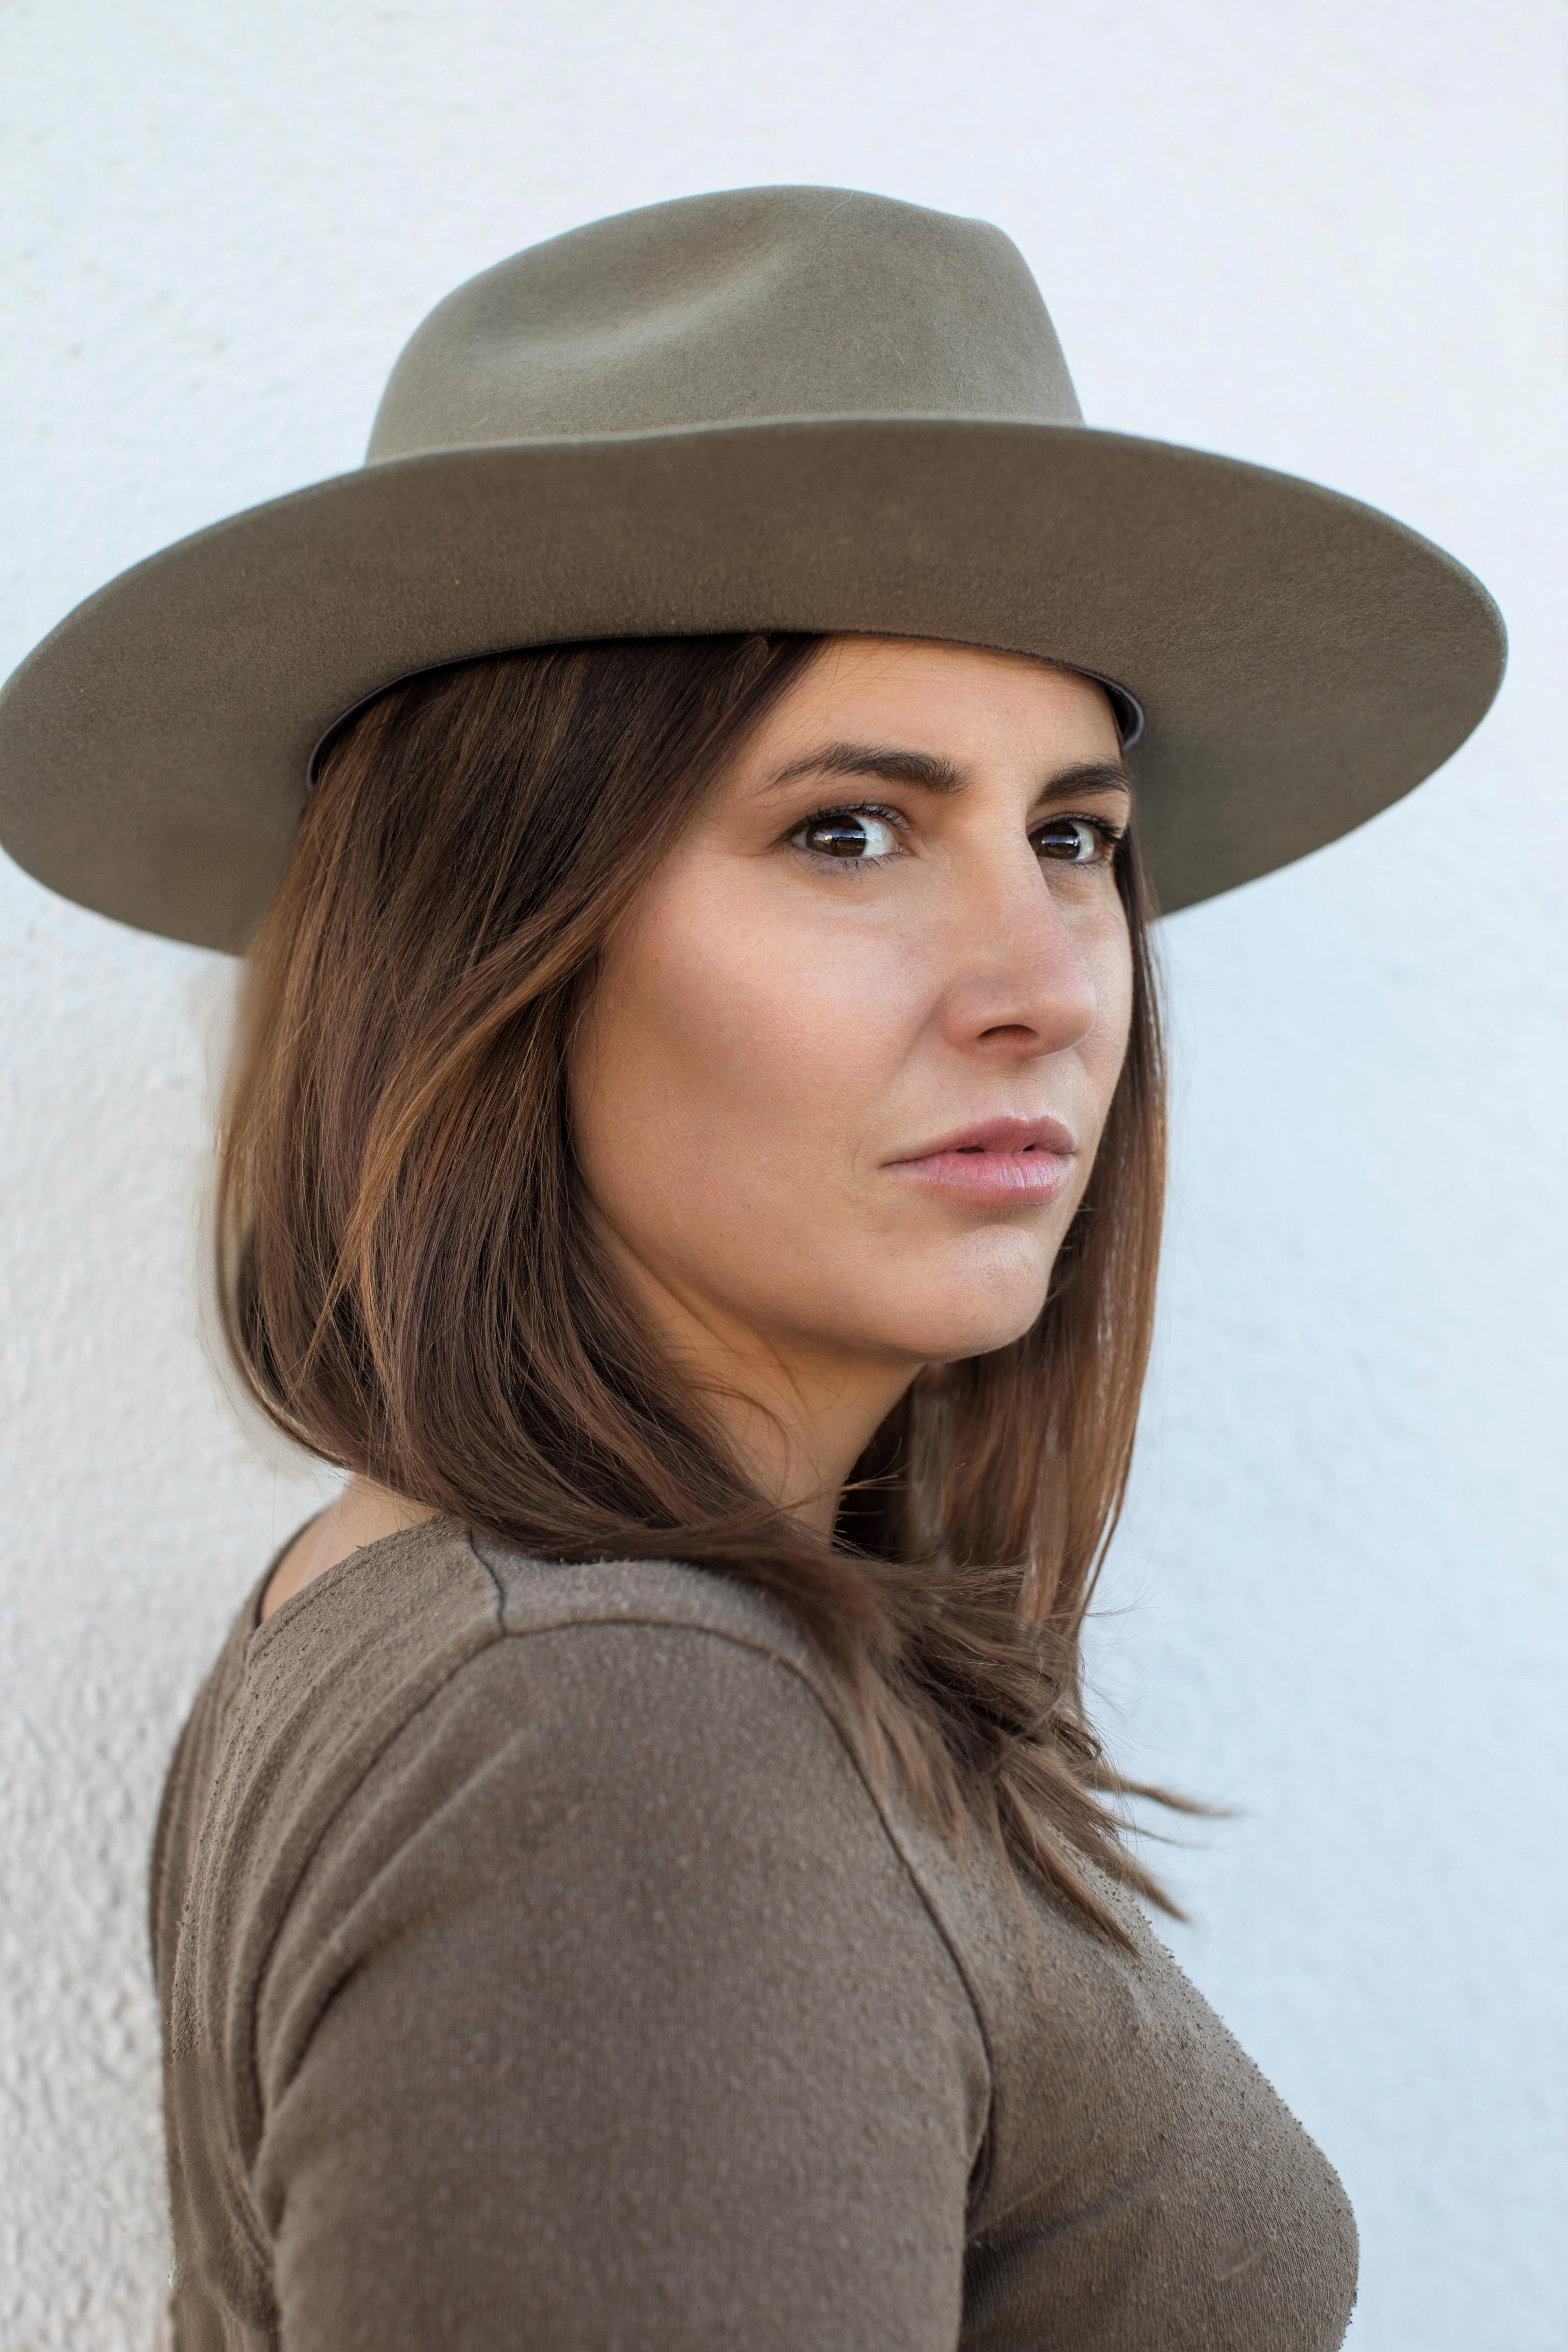 Woman with straight brown hair wearing a brown shirt and brown hat, looking off to her right in the distance